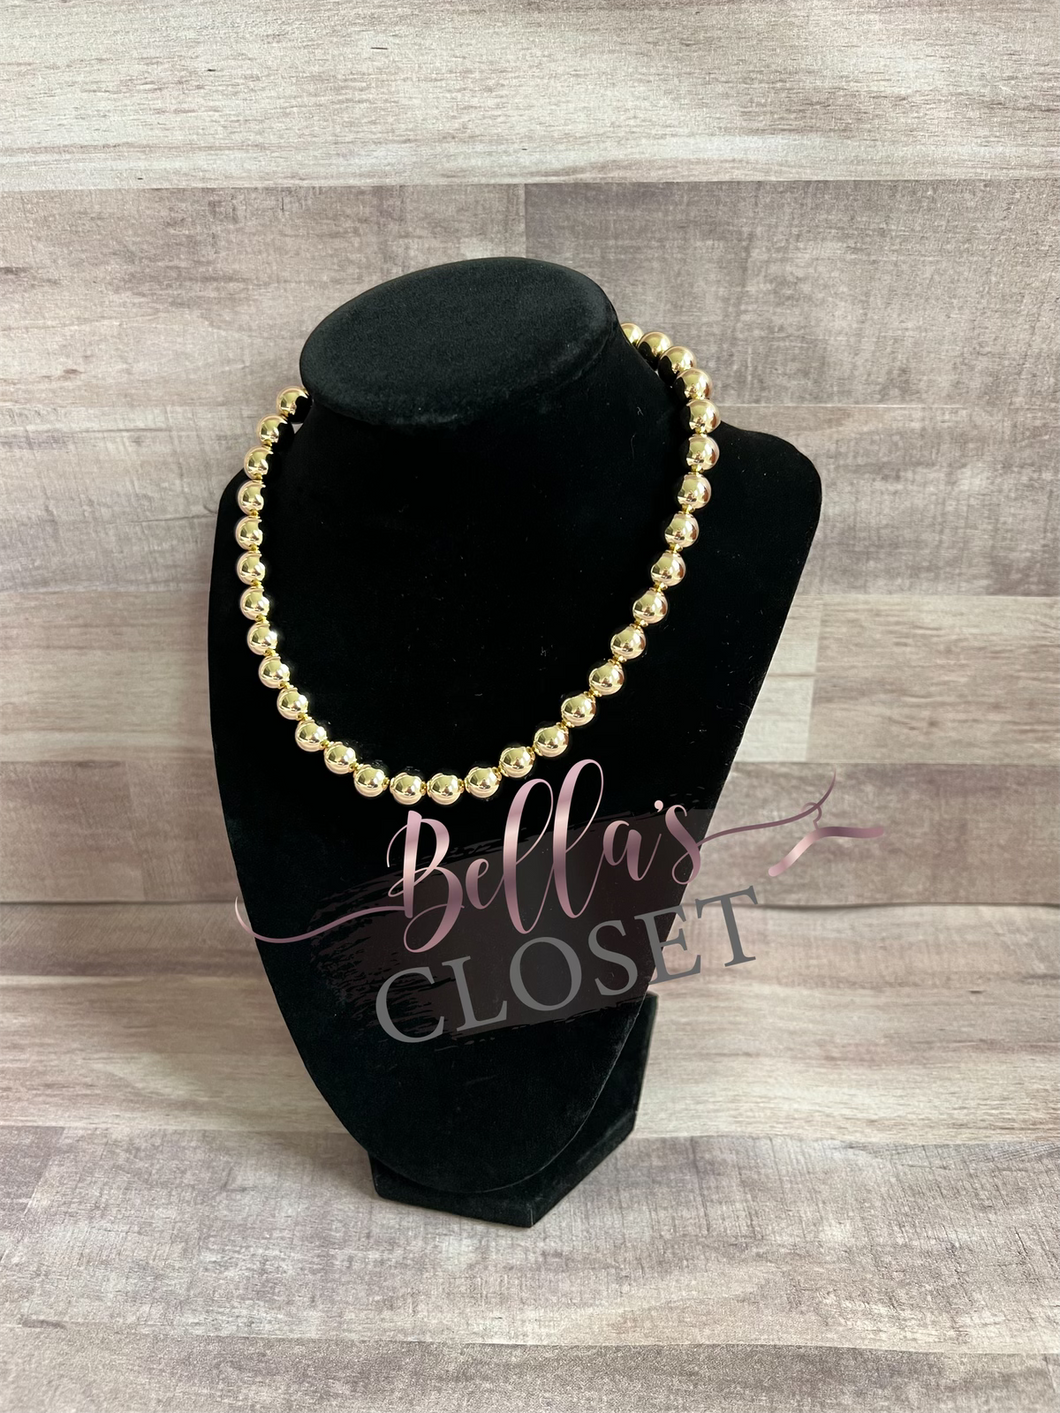 10mm Gold Filled beaded necklace